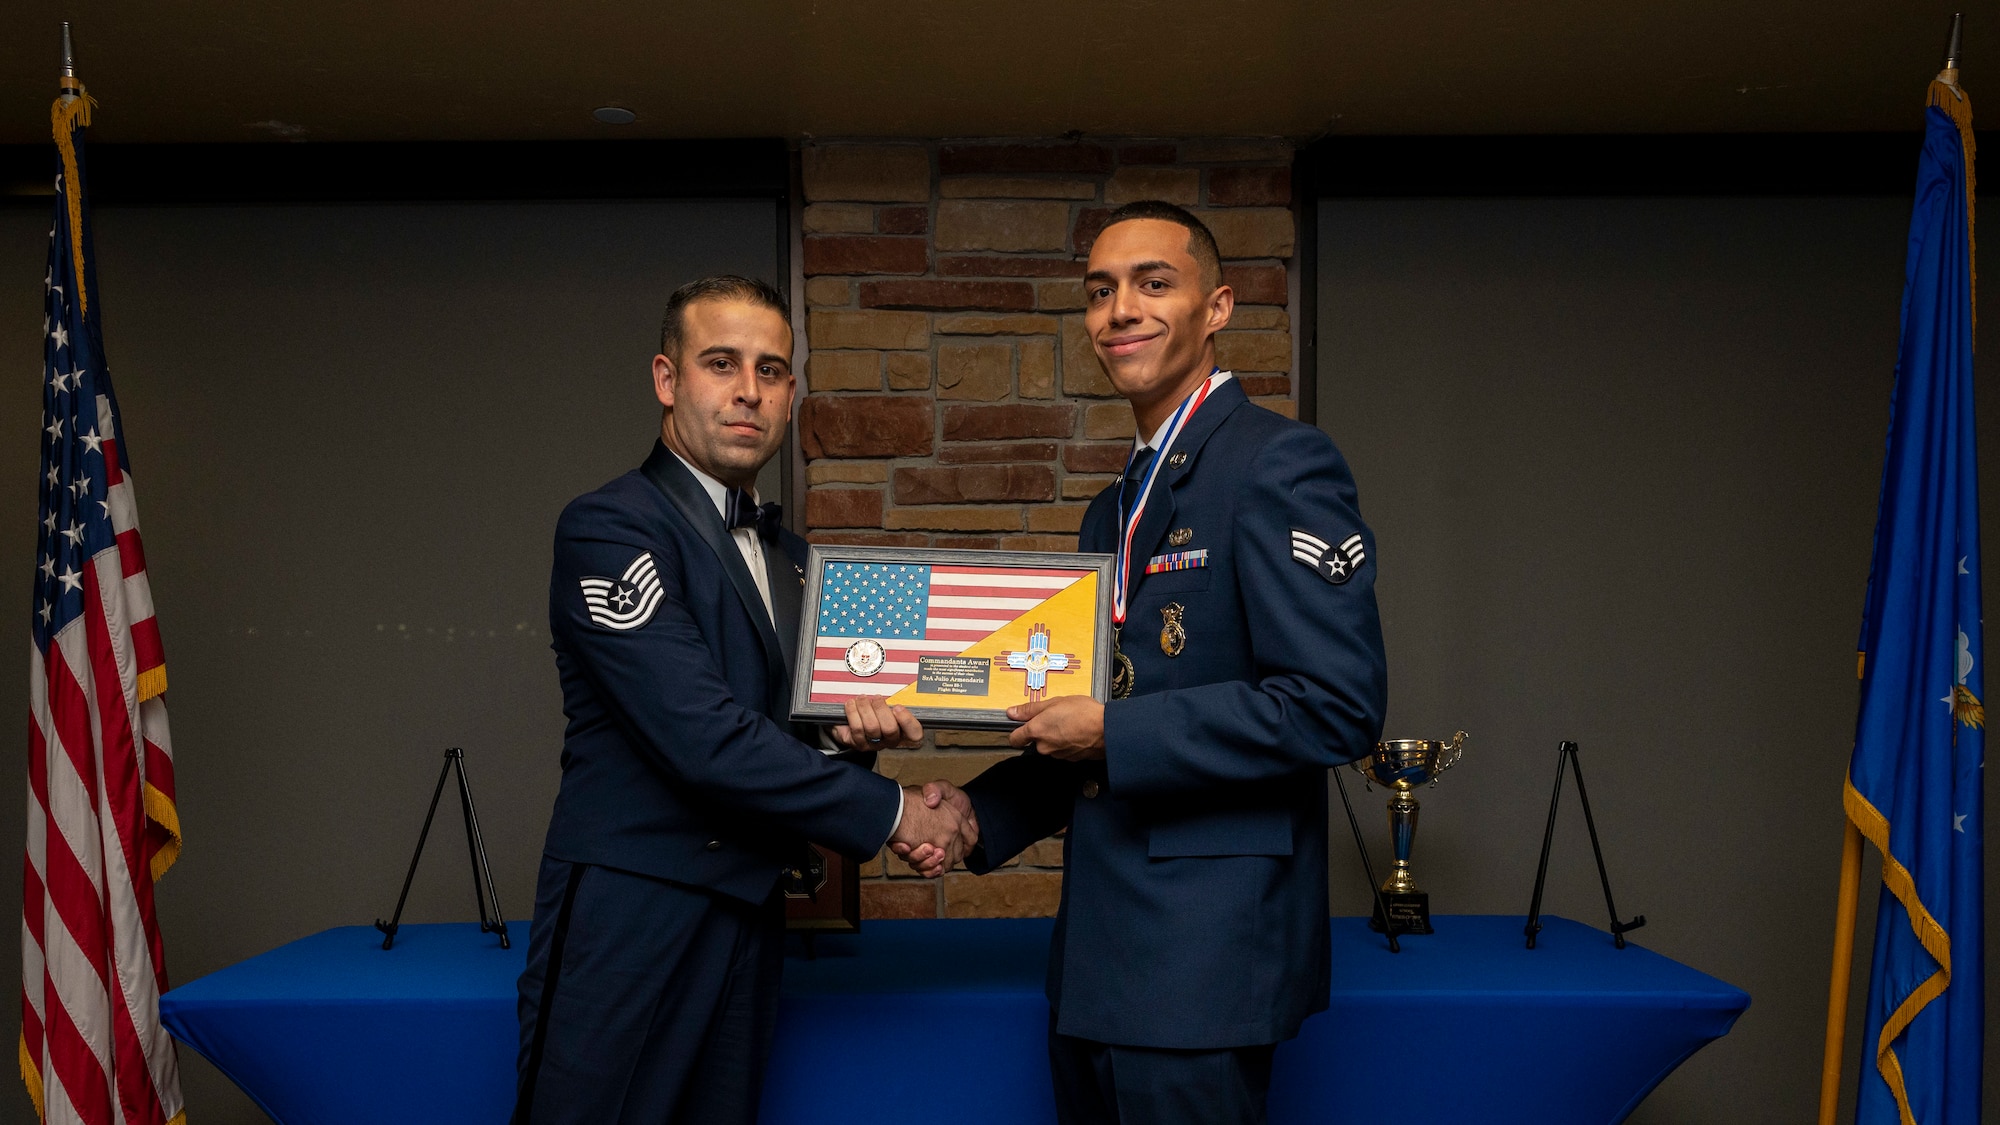 U.S. Air Force Senior Airman Julio Armendariz, right, accepts the Commandant's Award from U.S. Air Force Tech. Sgt. Matthew Cabral, 49th Civil Engineer Squadron, command support staff section chief, during an Airman Leadership School graduation at Holloman Air Force Base, New Mexico, Nov. 3, 2022.